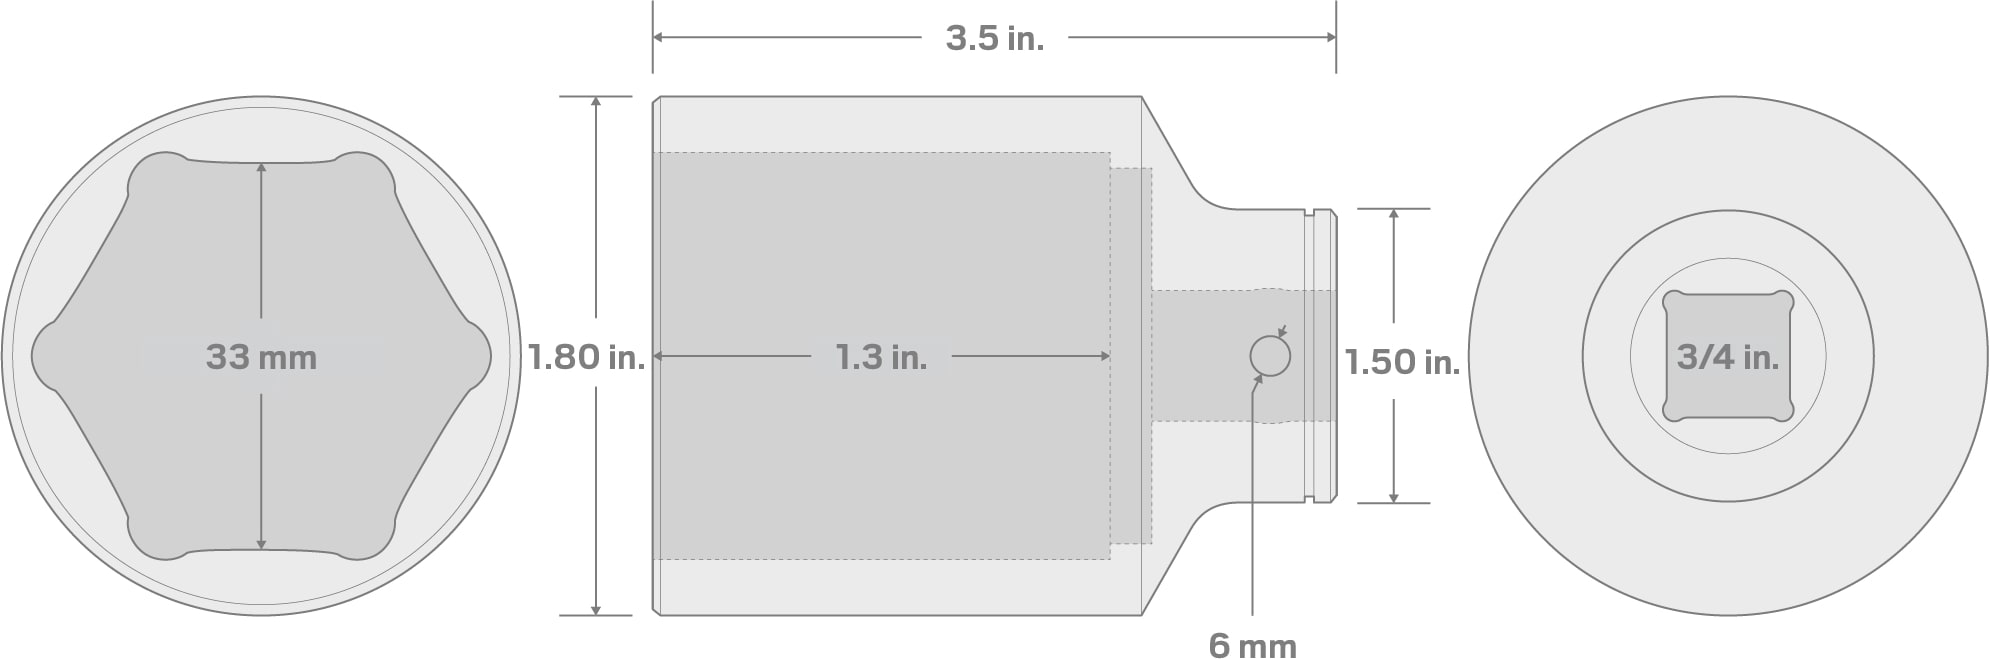 Specs for 3/4 Inch Drive x 33 mm Deep 6-Point Socket